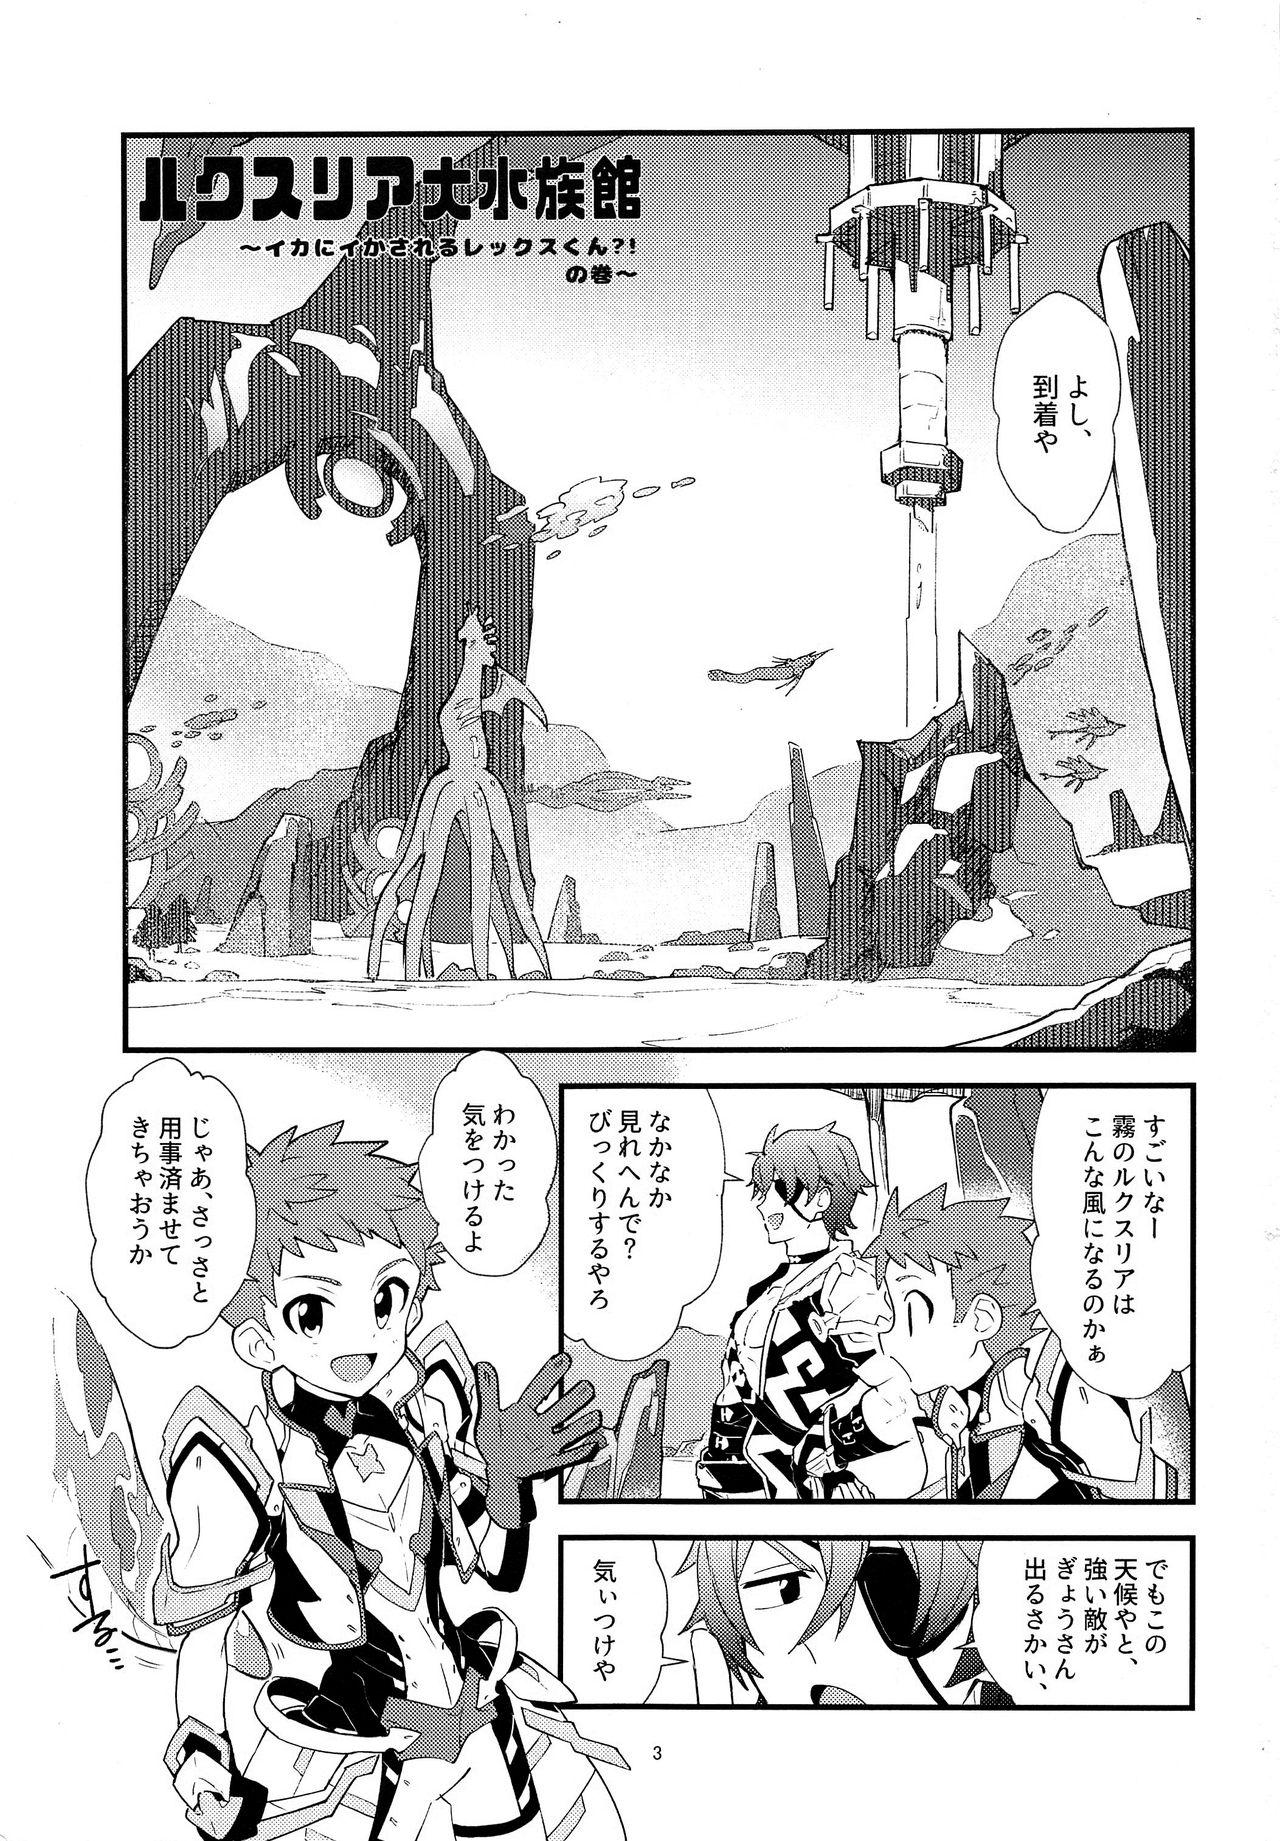 Housewife LUXURIUM - Xenoblade chronicles 2 18yearsold - Page 2